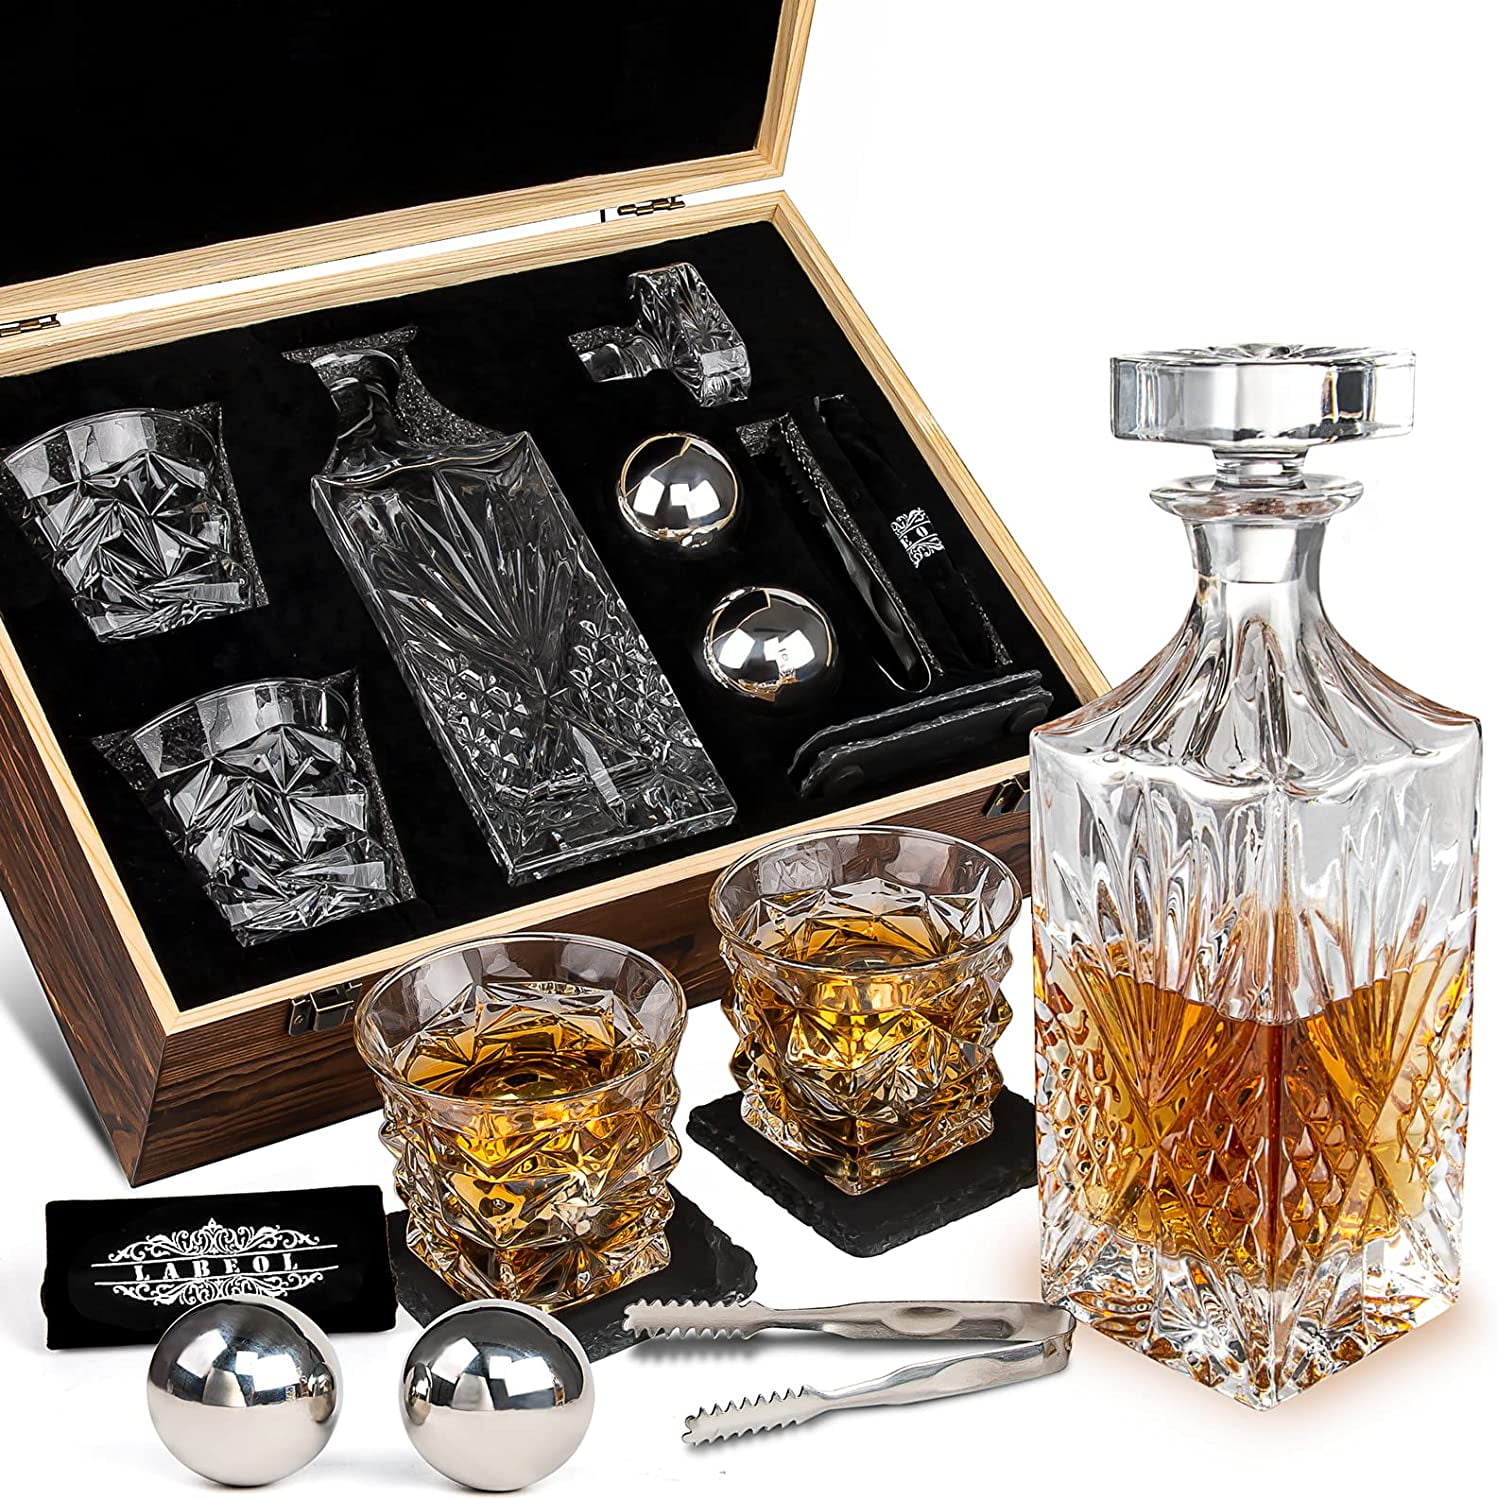 Scotch or Whisky Gifts for Men Amerigo Luxurious Golden Whiskey Decanter Set Gifts for Dad Bar Set Gift for Him Crystal Liquor Decanter for Bourbon Bar Accessories 